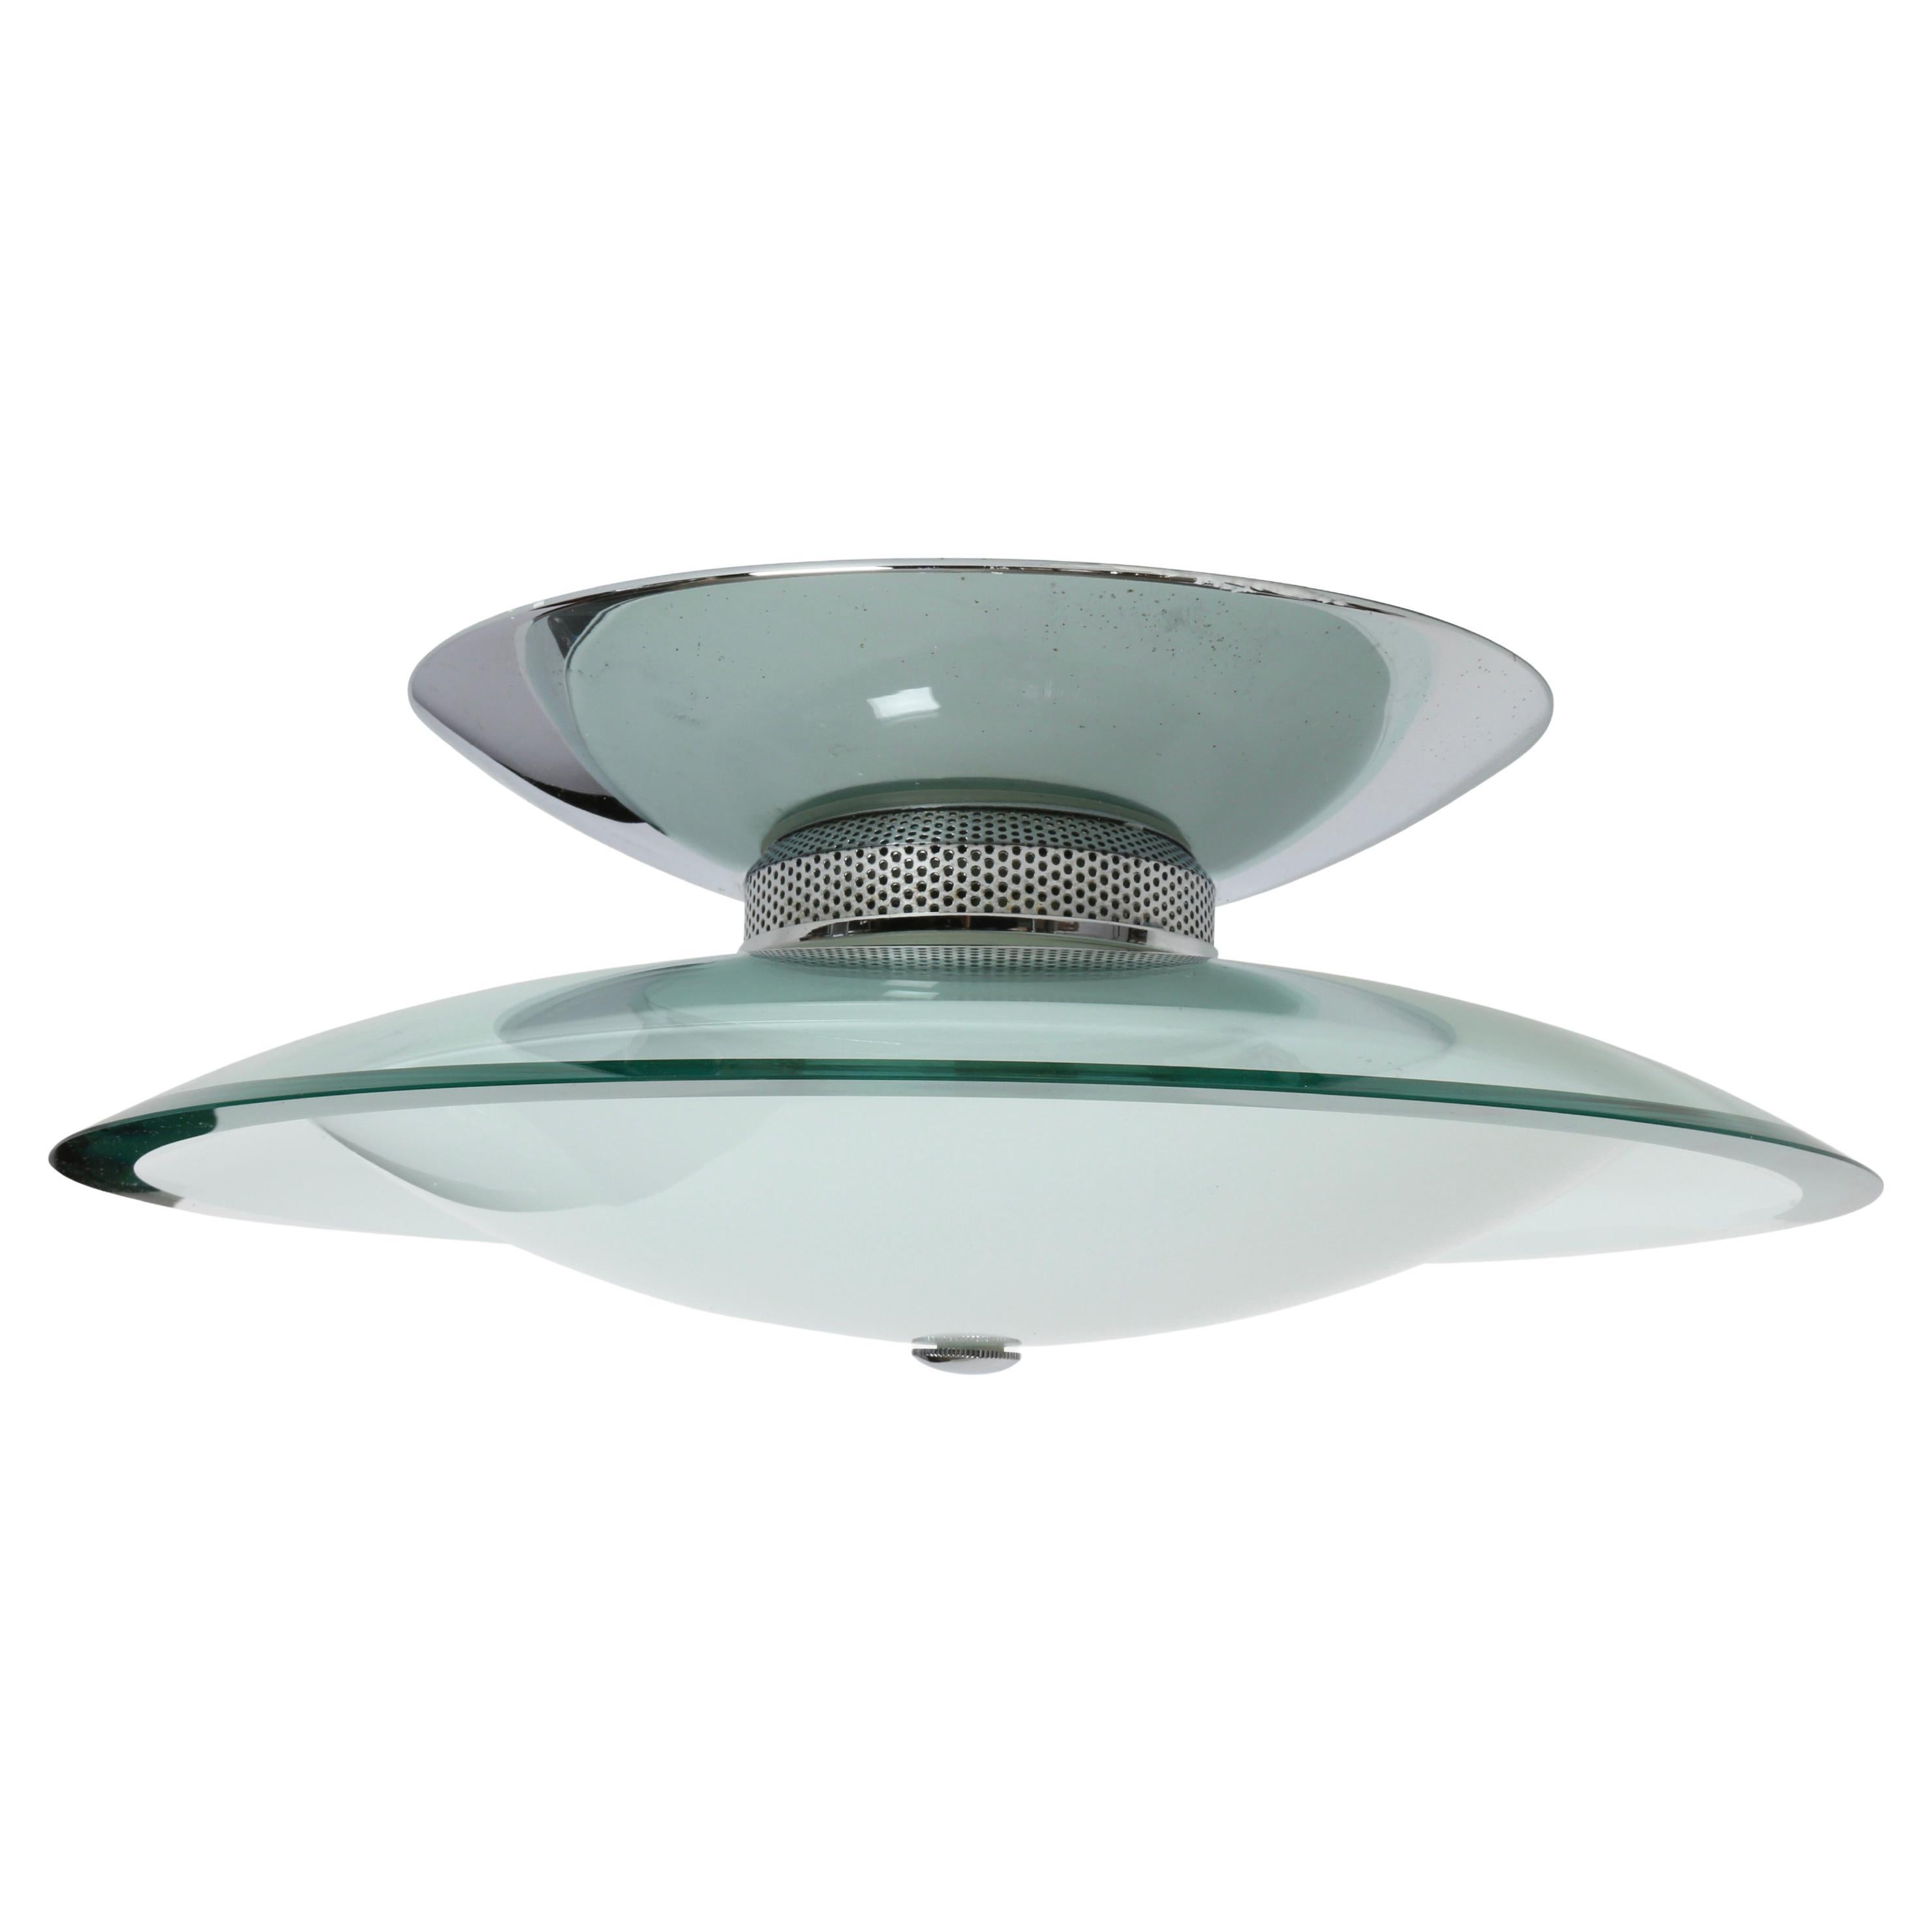 Flush mount ceiling light in the style of Fontana Arte.
Made in Italy in 1960s.
Two kinds of glass.
Takes 4 candelabra bulbs.
Complimentary US rewiring upon request.

We take pride in bringing vintage fixtures to their full glory again.
At Illustris